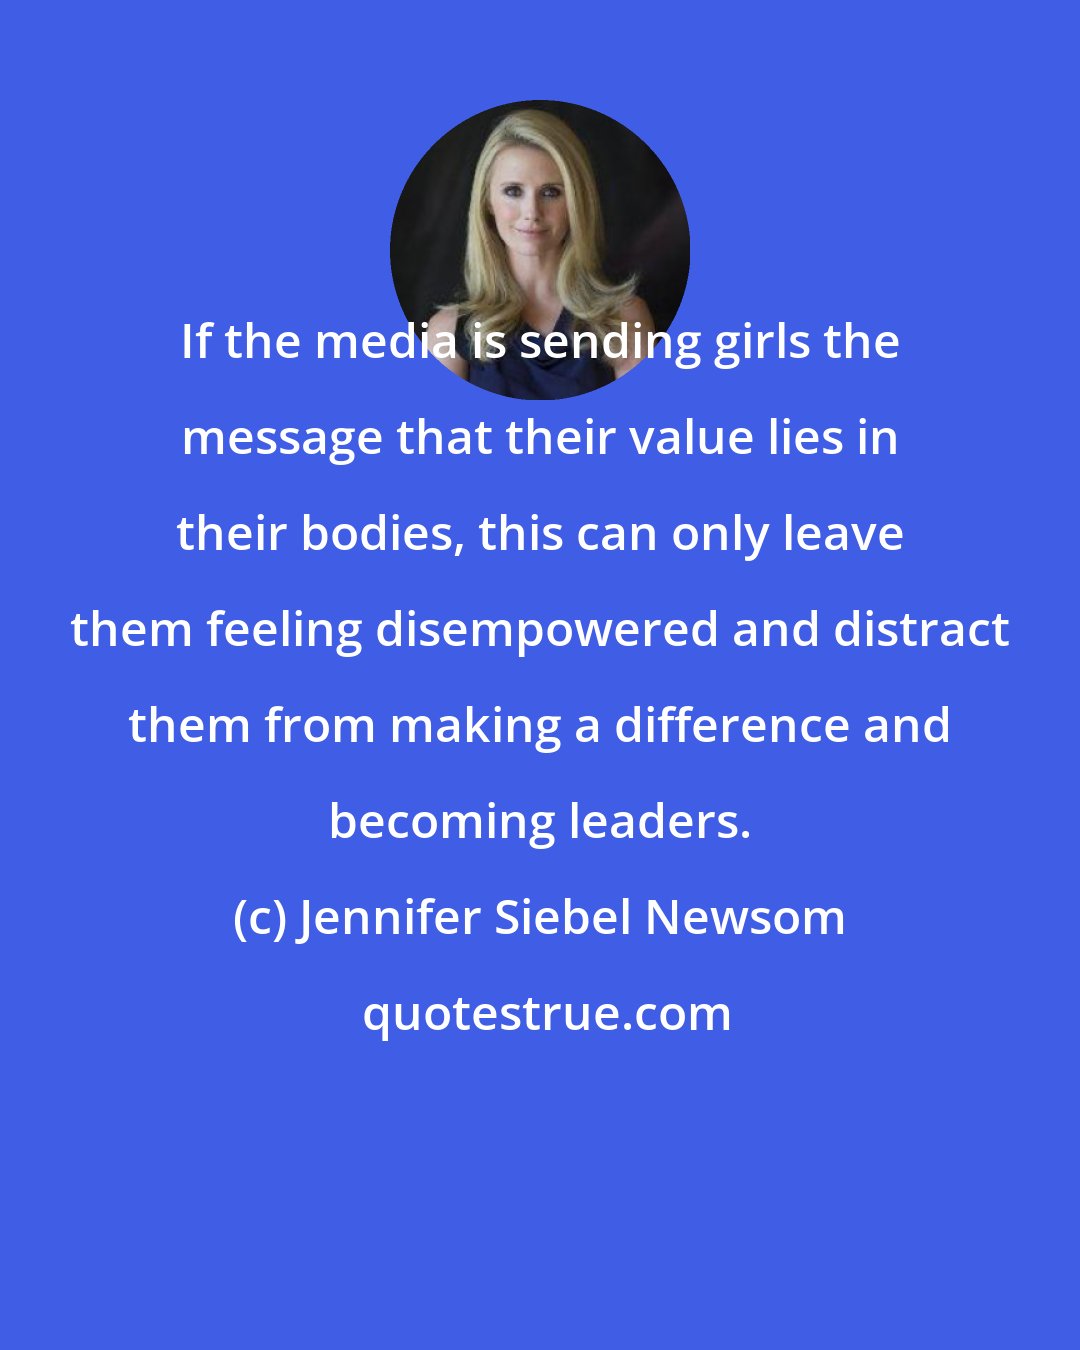 Jennifer Siebel Newsom: If the media is sending girls the message that their value lies in their bodies, this can only leave them feeling disempowered and distract them from making a difference and becoming leaders.